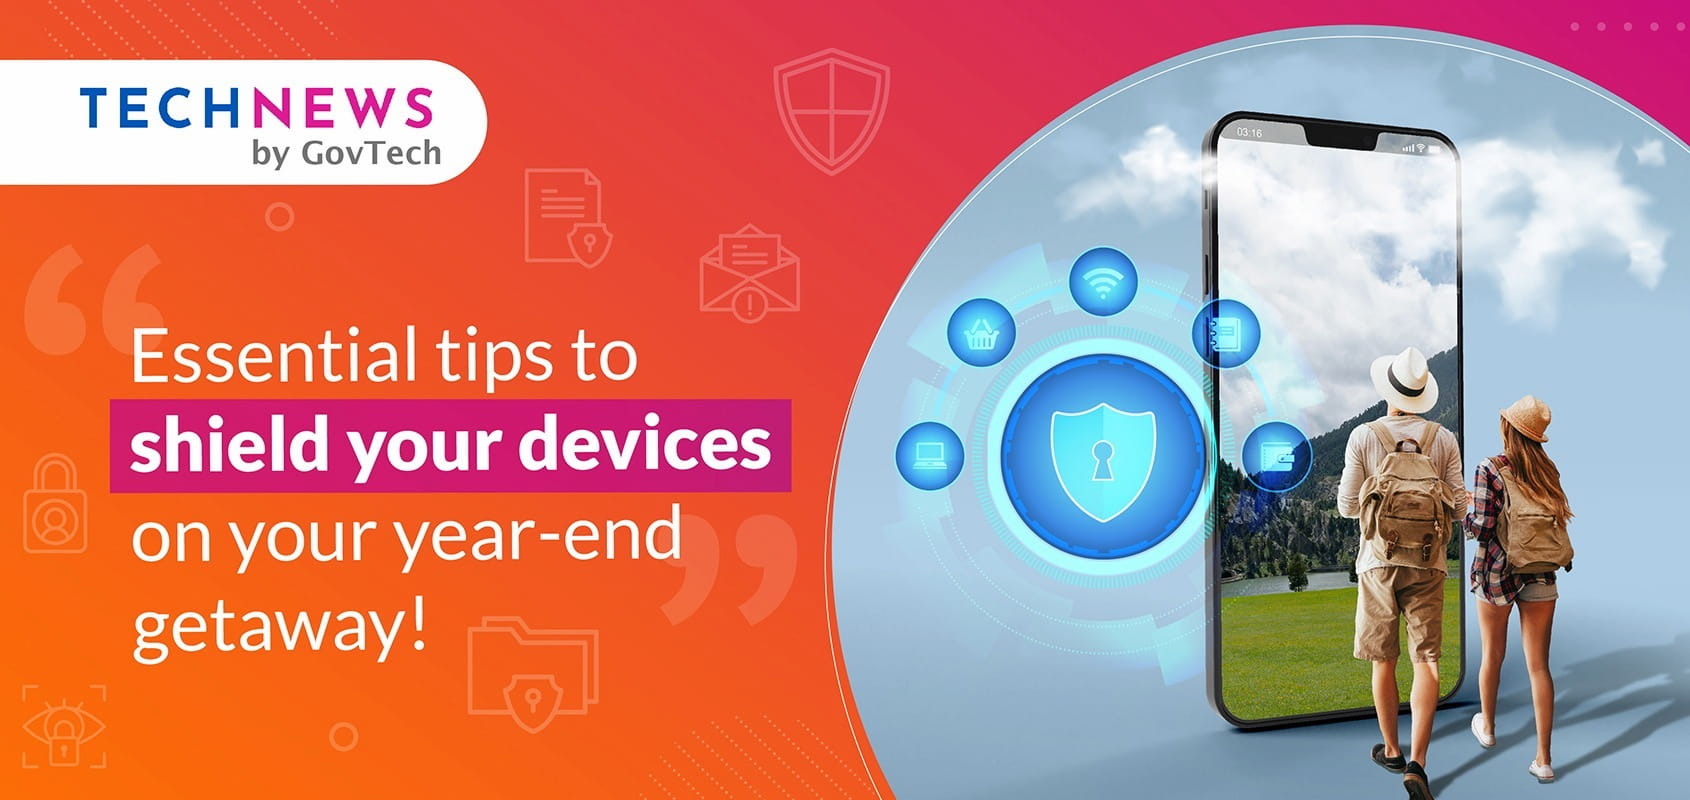 Safeguard your devices by following these tips for a secure and enjoyable trip